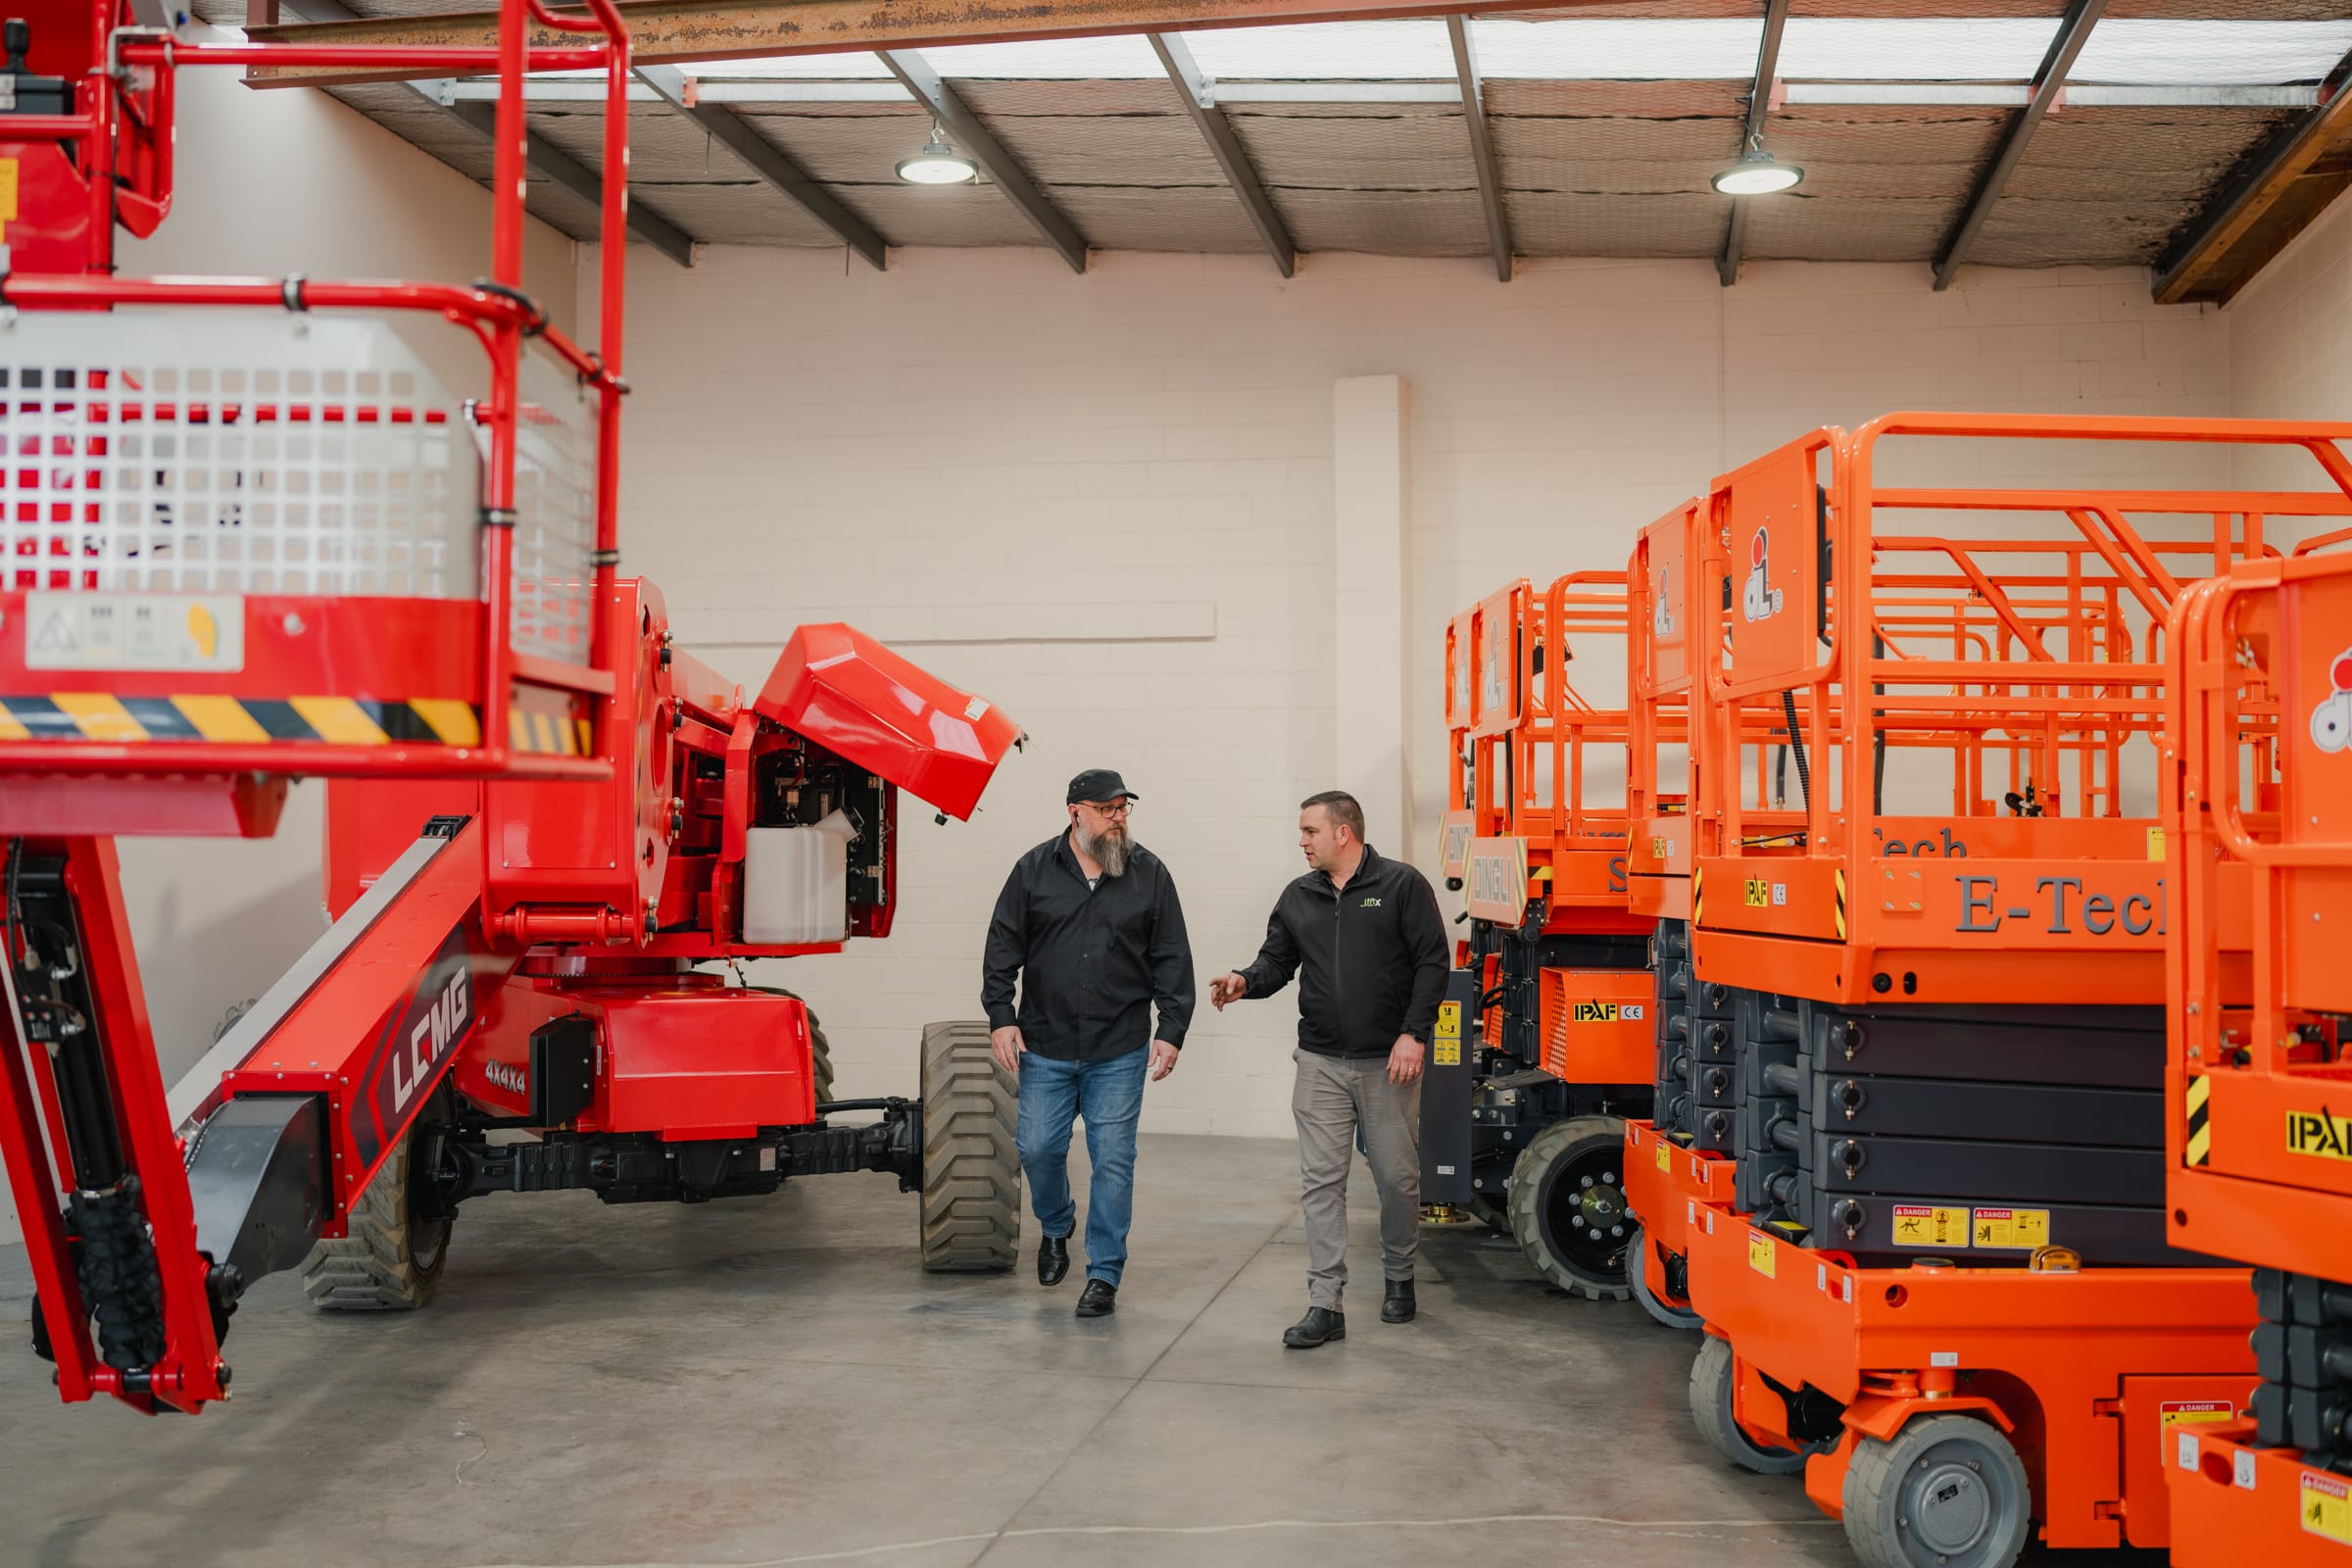 LiftX EWP Christchurch Service Centre for major inspections and fault finding